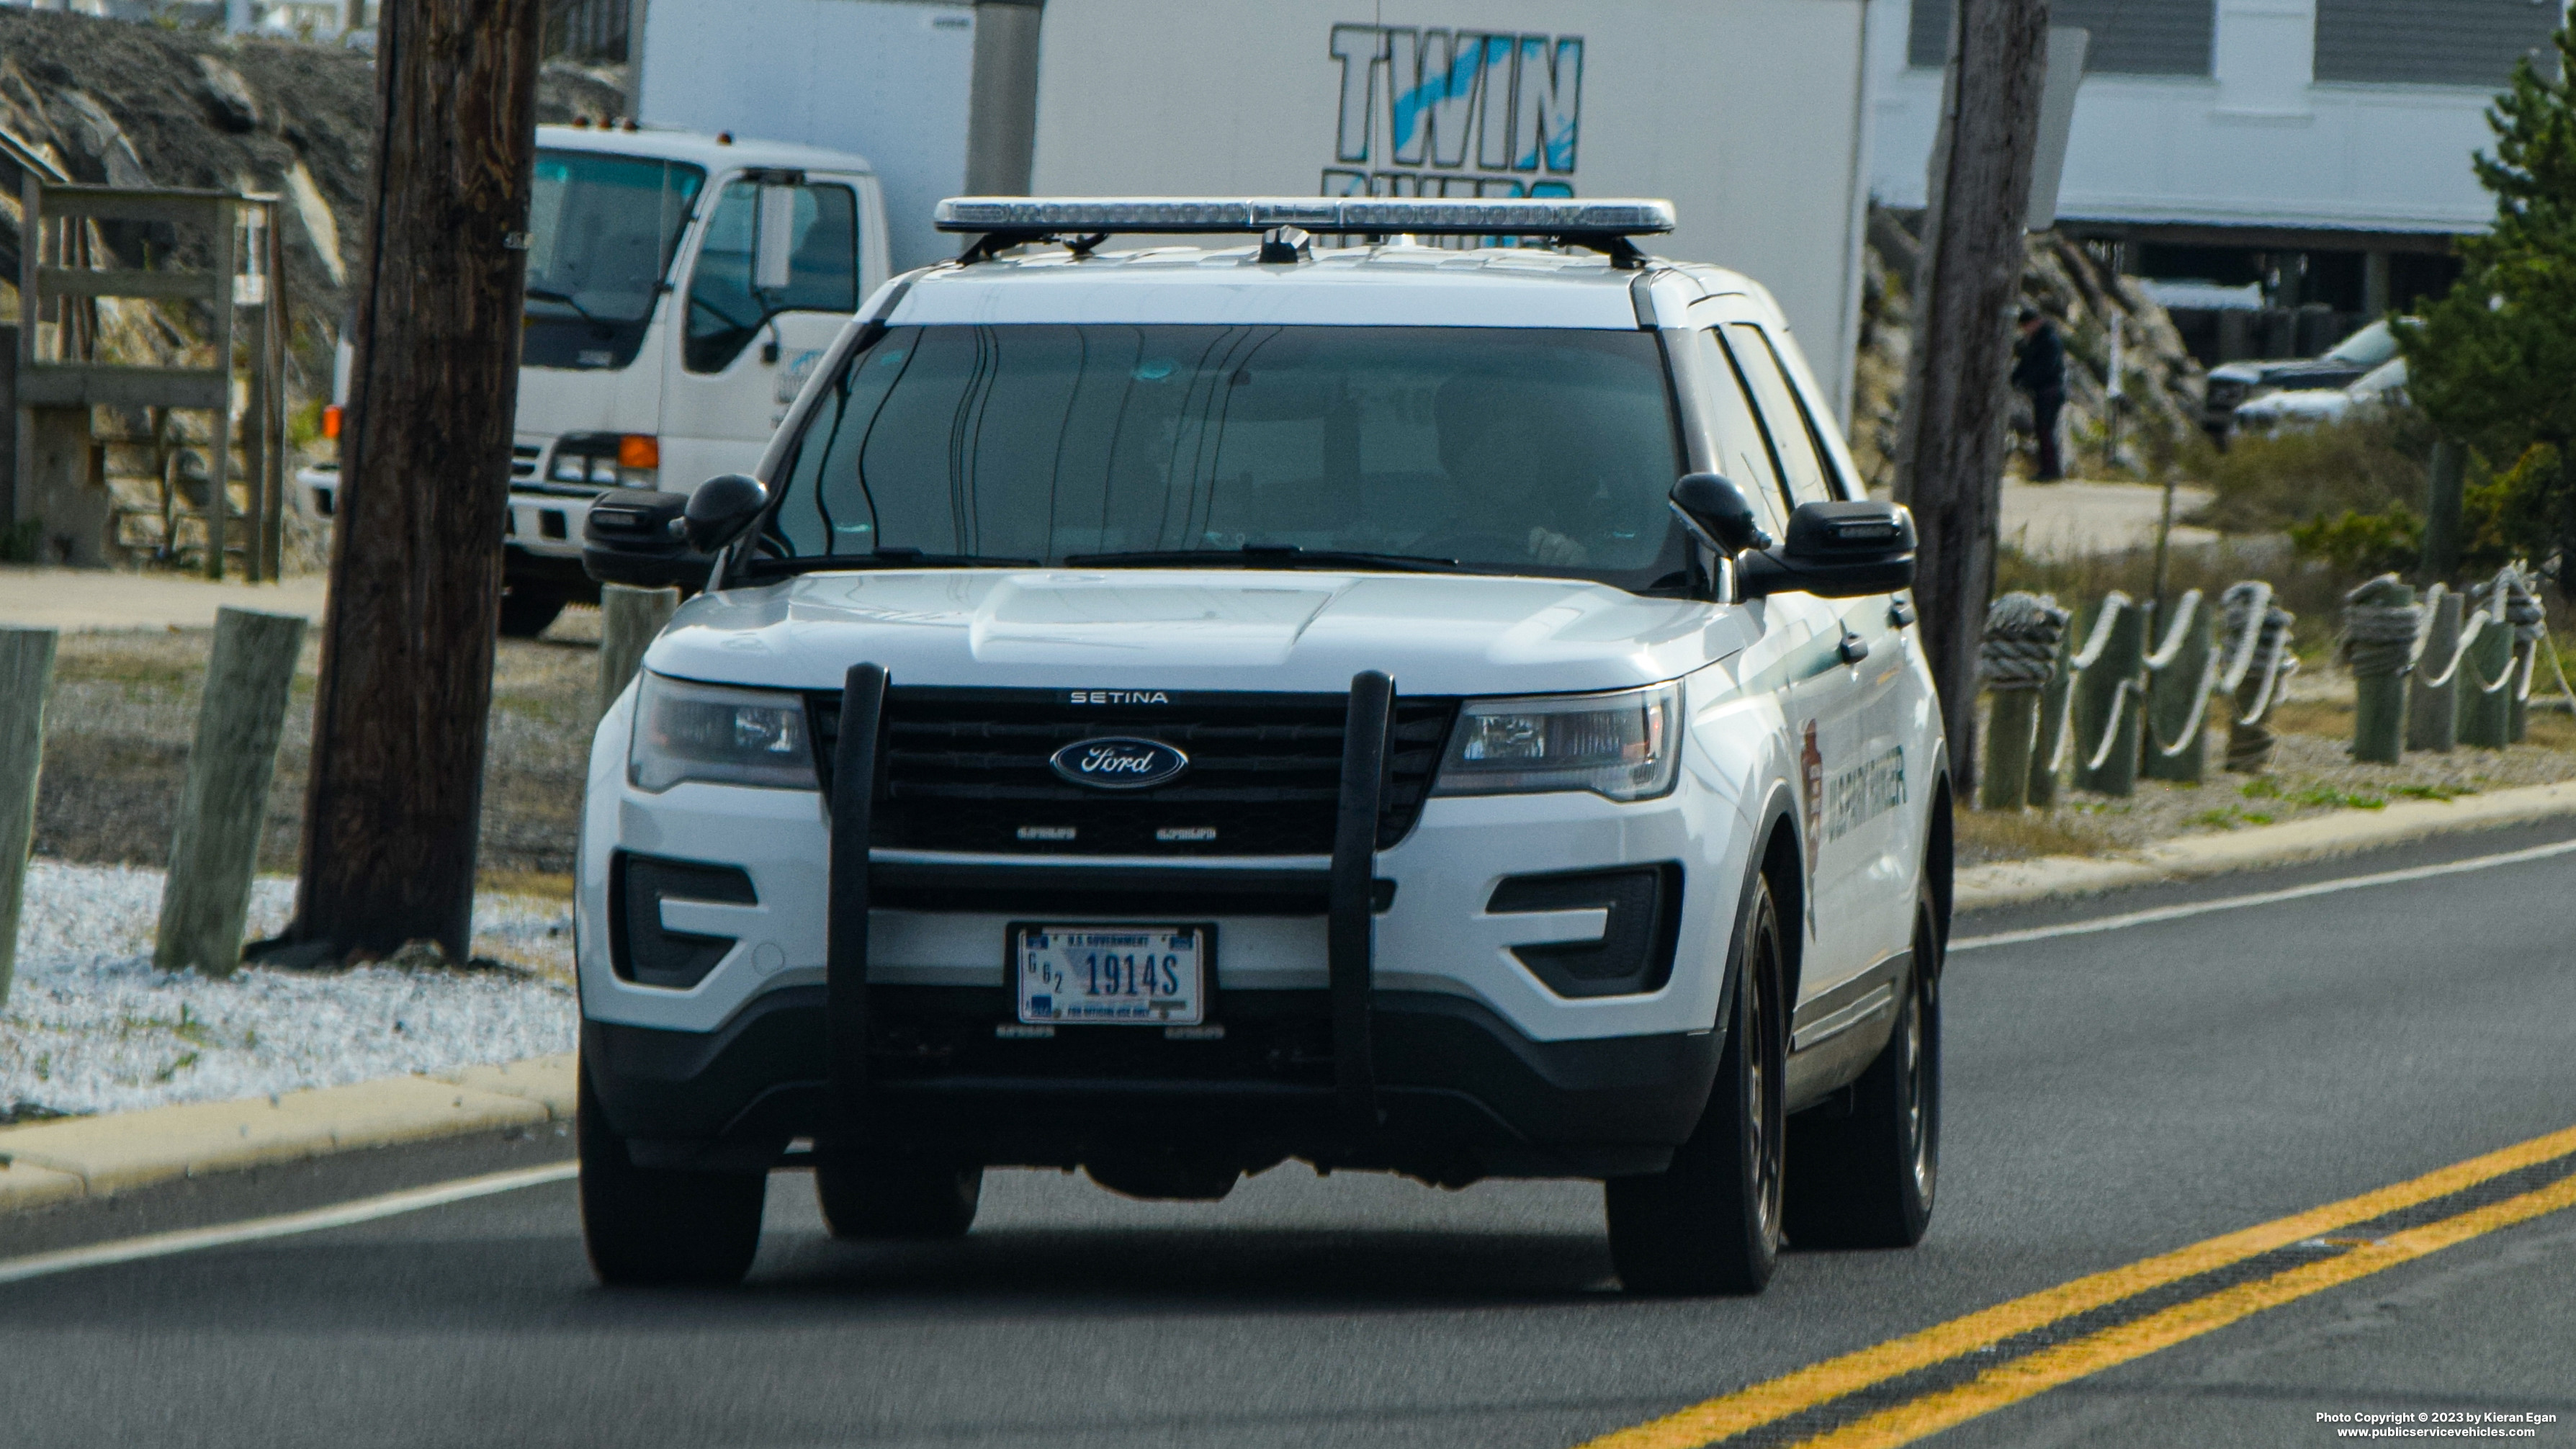 A photo  of United States National Park Service Law Enforcement Rangers
            Cruiser 1914S, a 2016-2019 Ford Police Interceptor Utility             taken by Kieran Egan